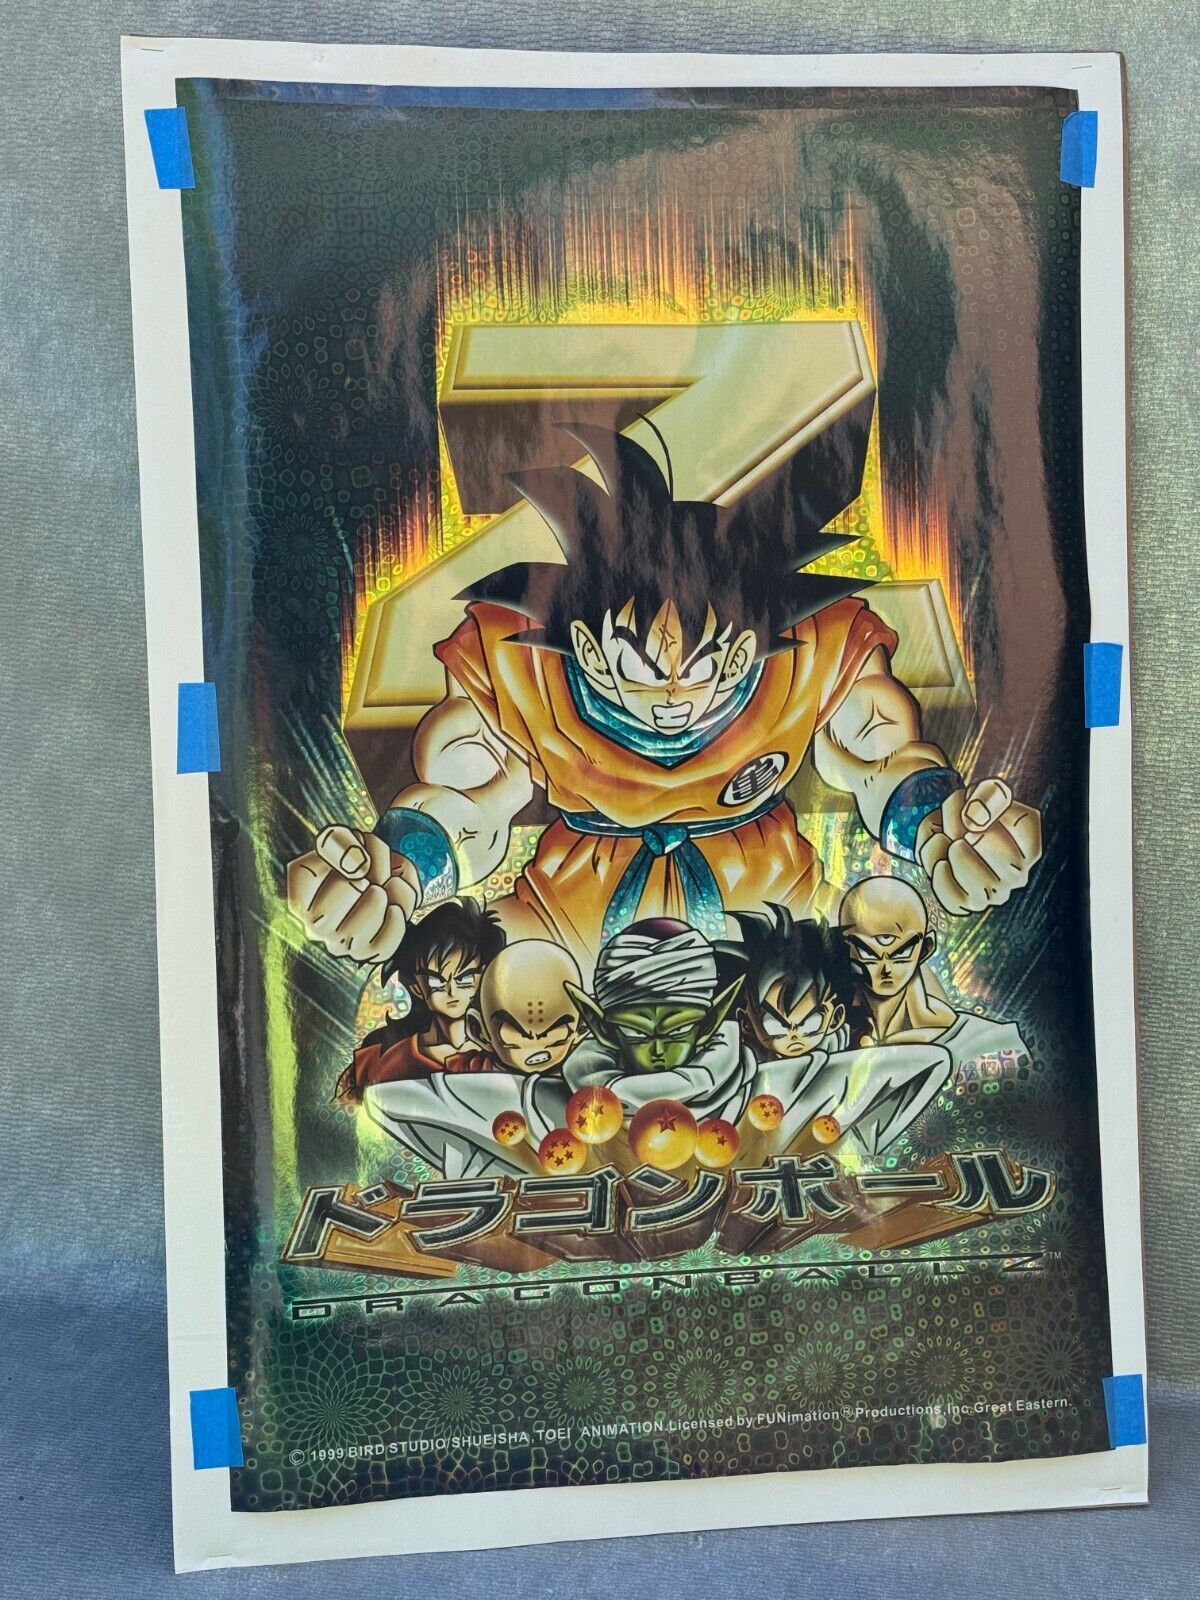 1999 DRAGON BALL Z POSTER HOLOGRAPHIC METALLIC PSYCHEDELIC TOEI ANIMATION JAPAN